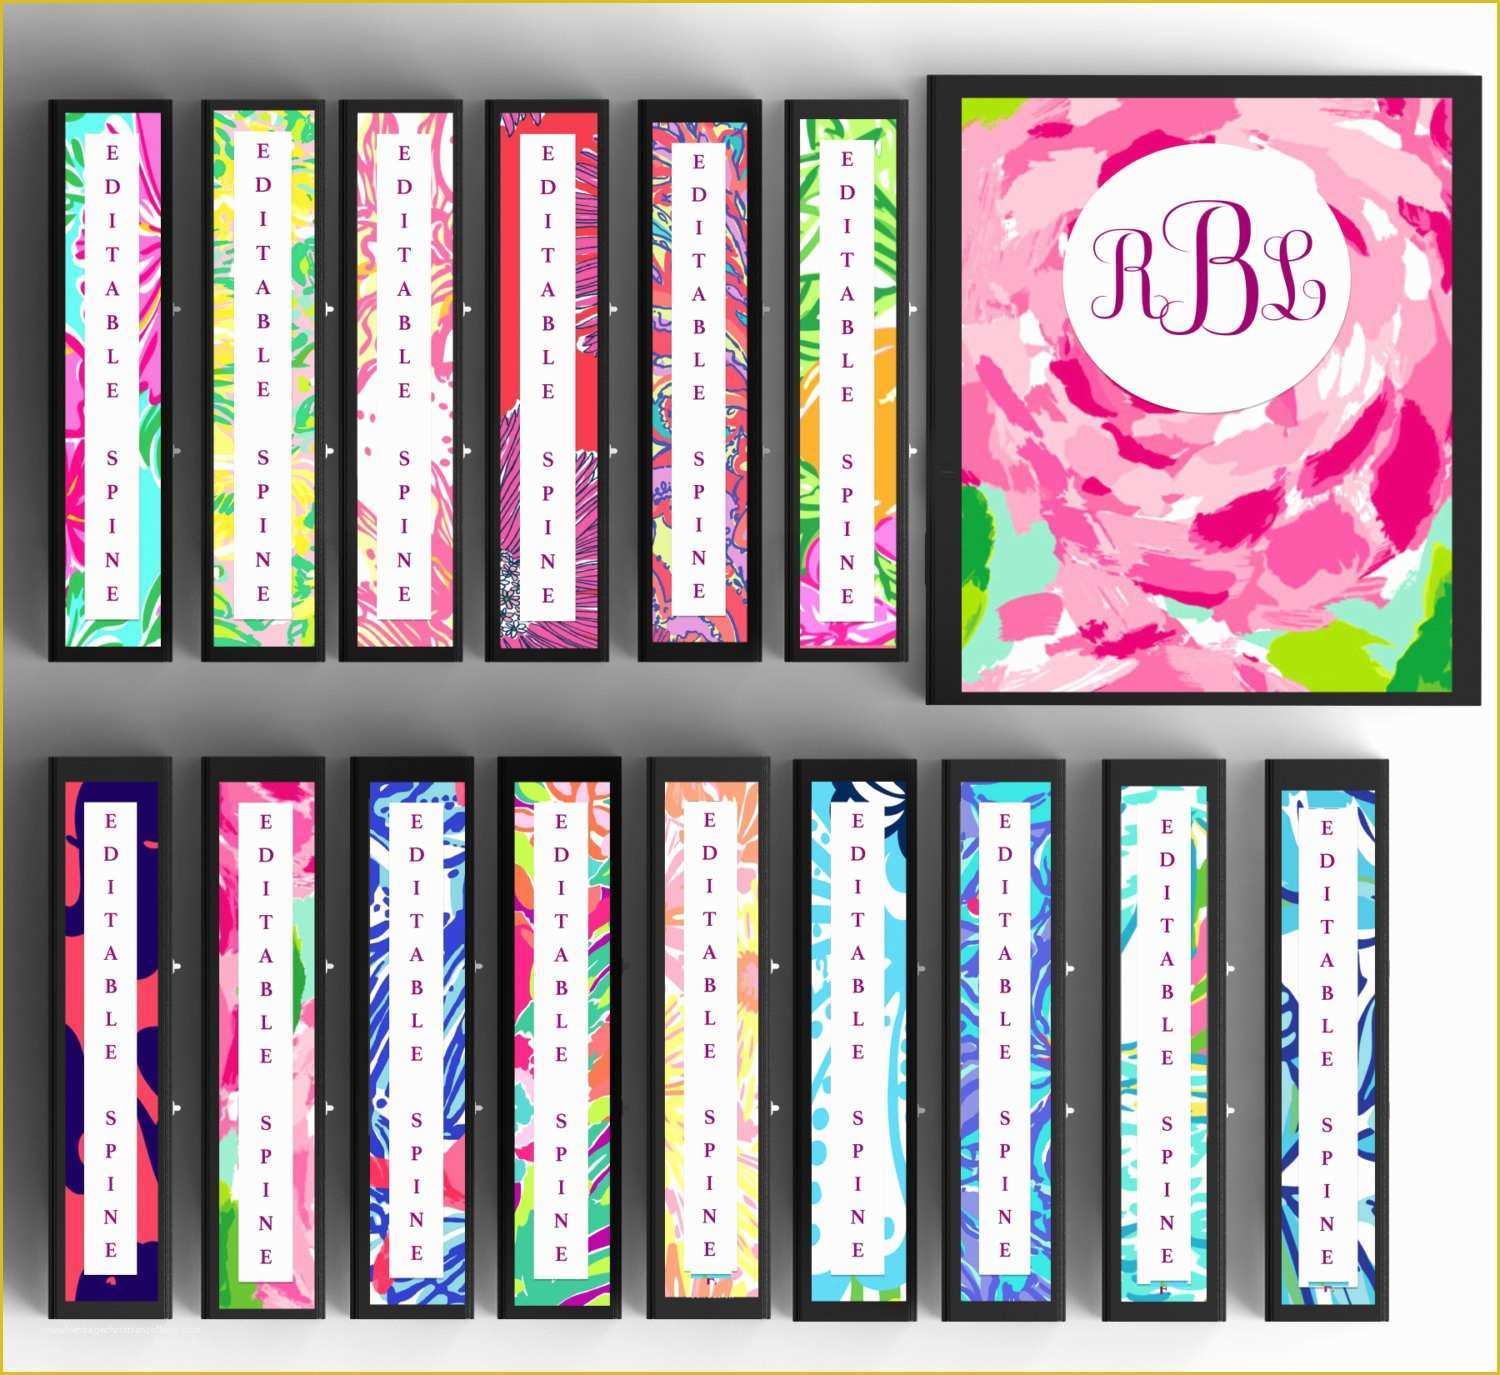 Free 1 Binder Spine Template Of Set Of 15 Monogram Binder Covers Lilly Pulitzer Inspired